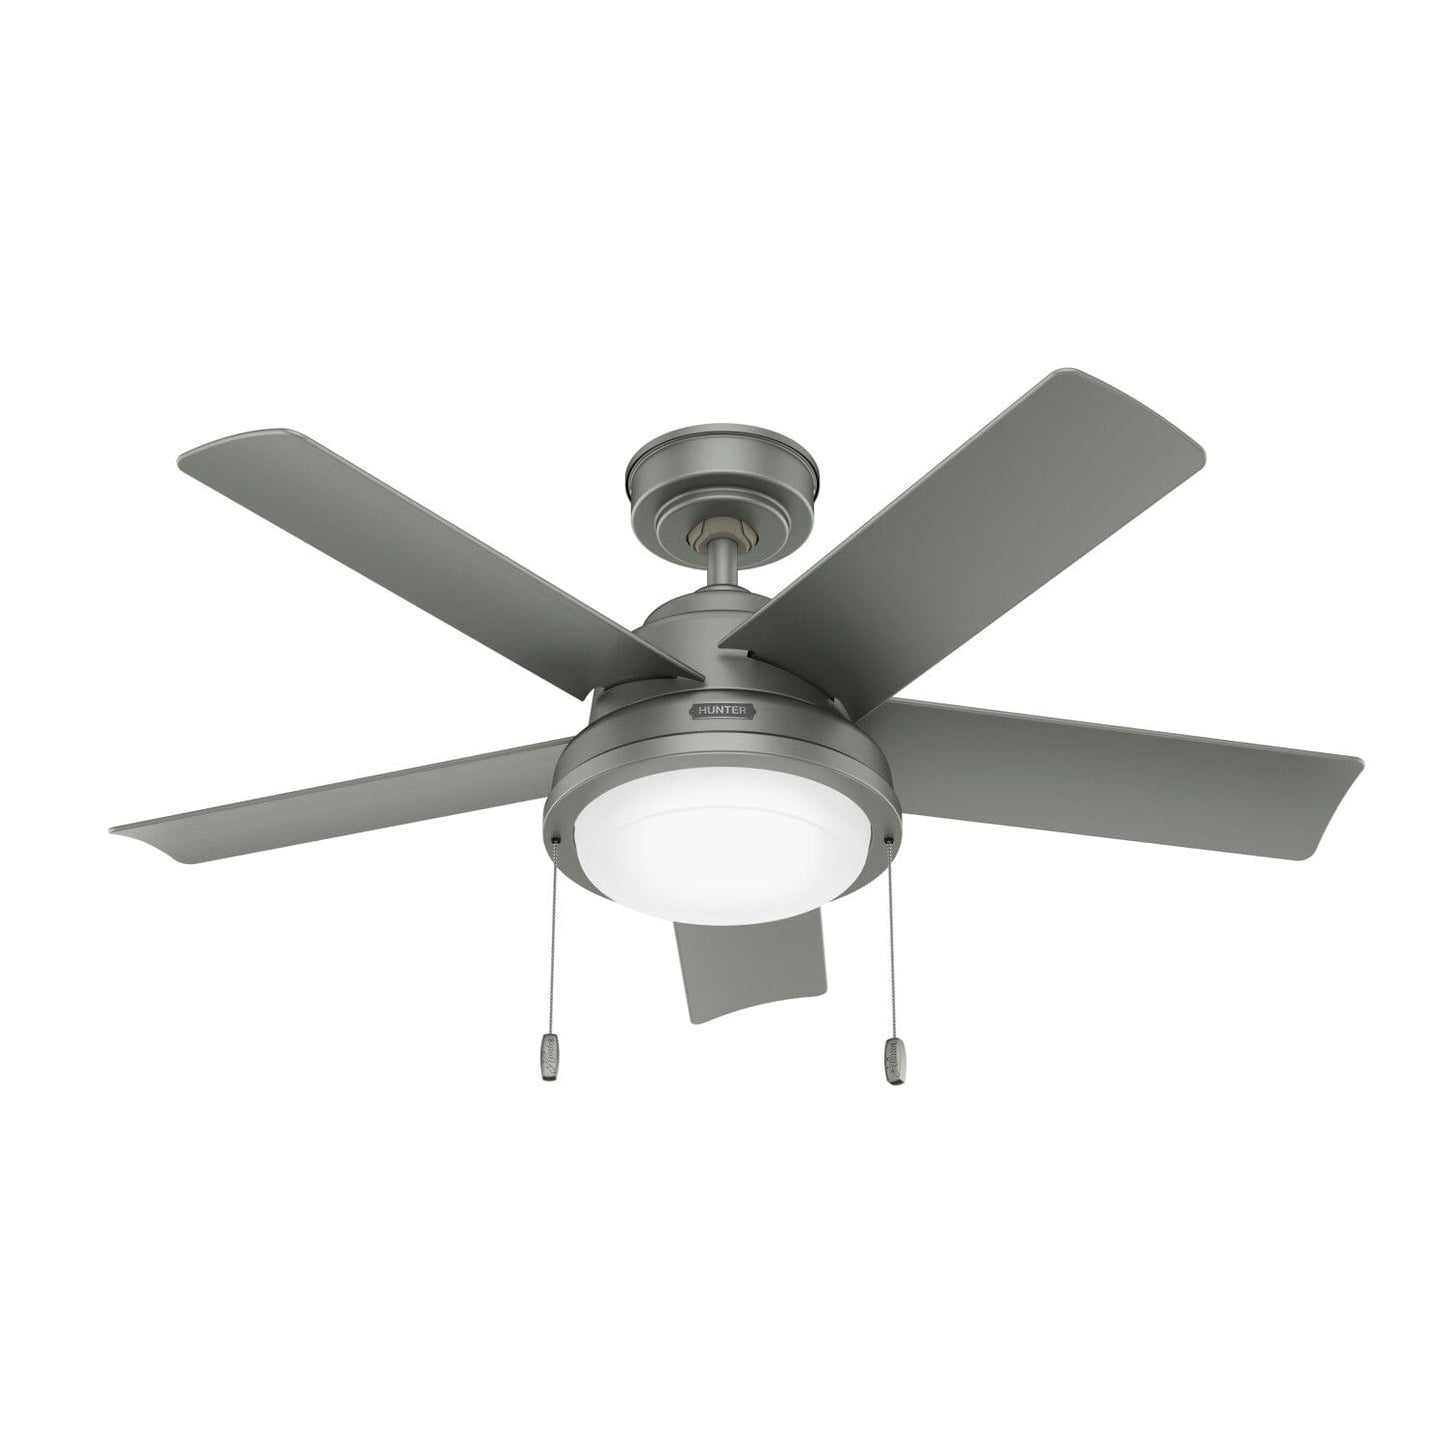 Seawall Outdoor With Led Light 44 Inch Ceiling Fan Hunter